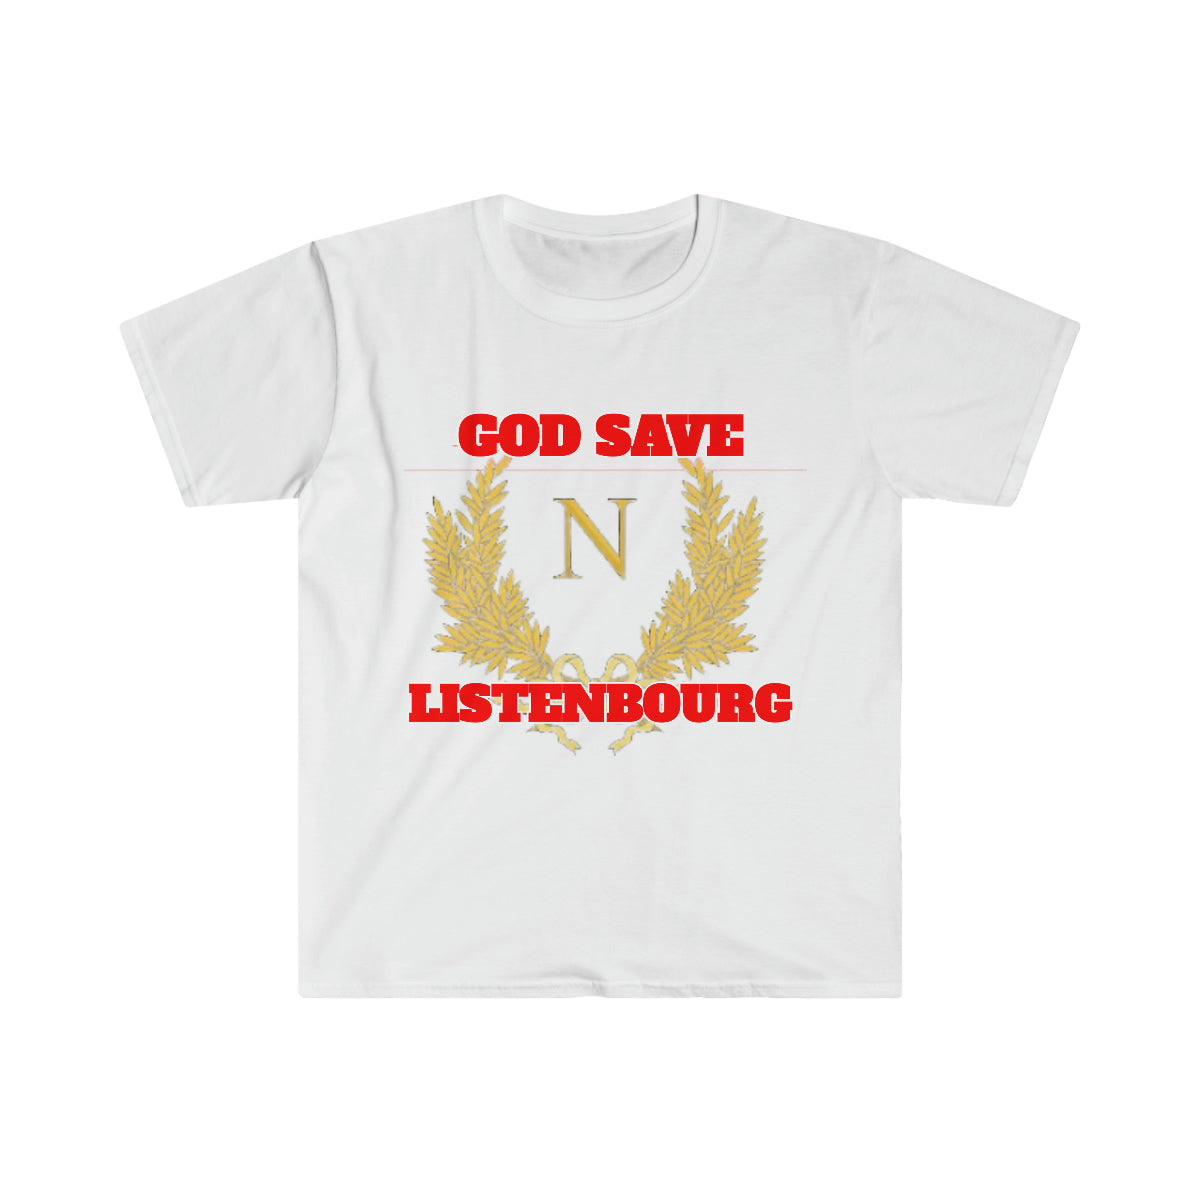 A wardrobe essential white t-shirt with red text from God Save Listebourg T-Shirt.